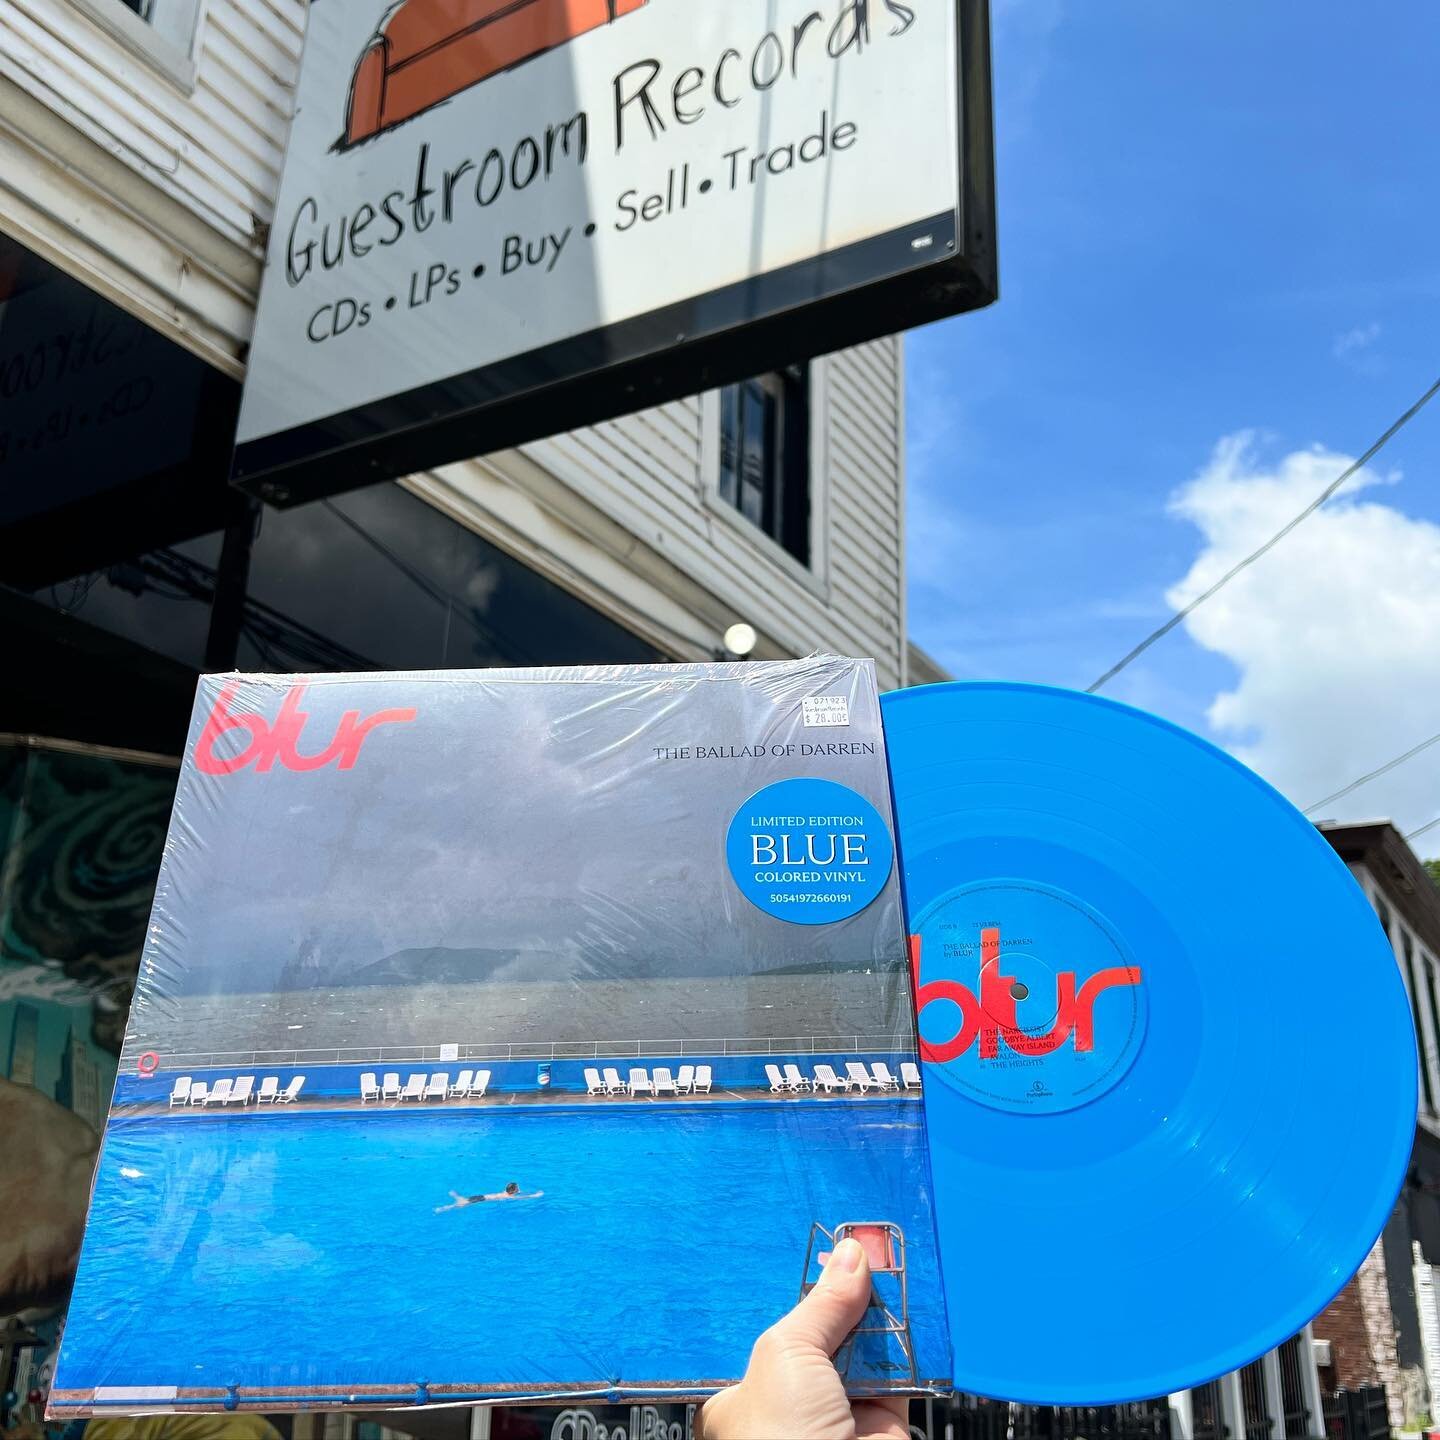 Happy Friday!!! Lots of cherries on an ice cream sunday of a week over here. 🍒🍨🍒 It&rsquo;s @blurofficial day! 💙 Swing by for free goodies with purchase of The Ballad of Darren on blue vinyl indie or CD and let L&amp;T tell you about seeing them 